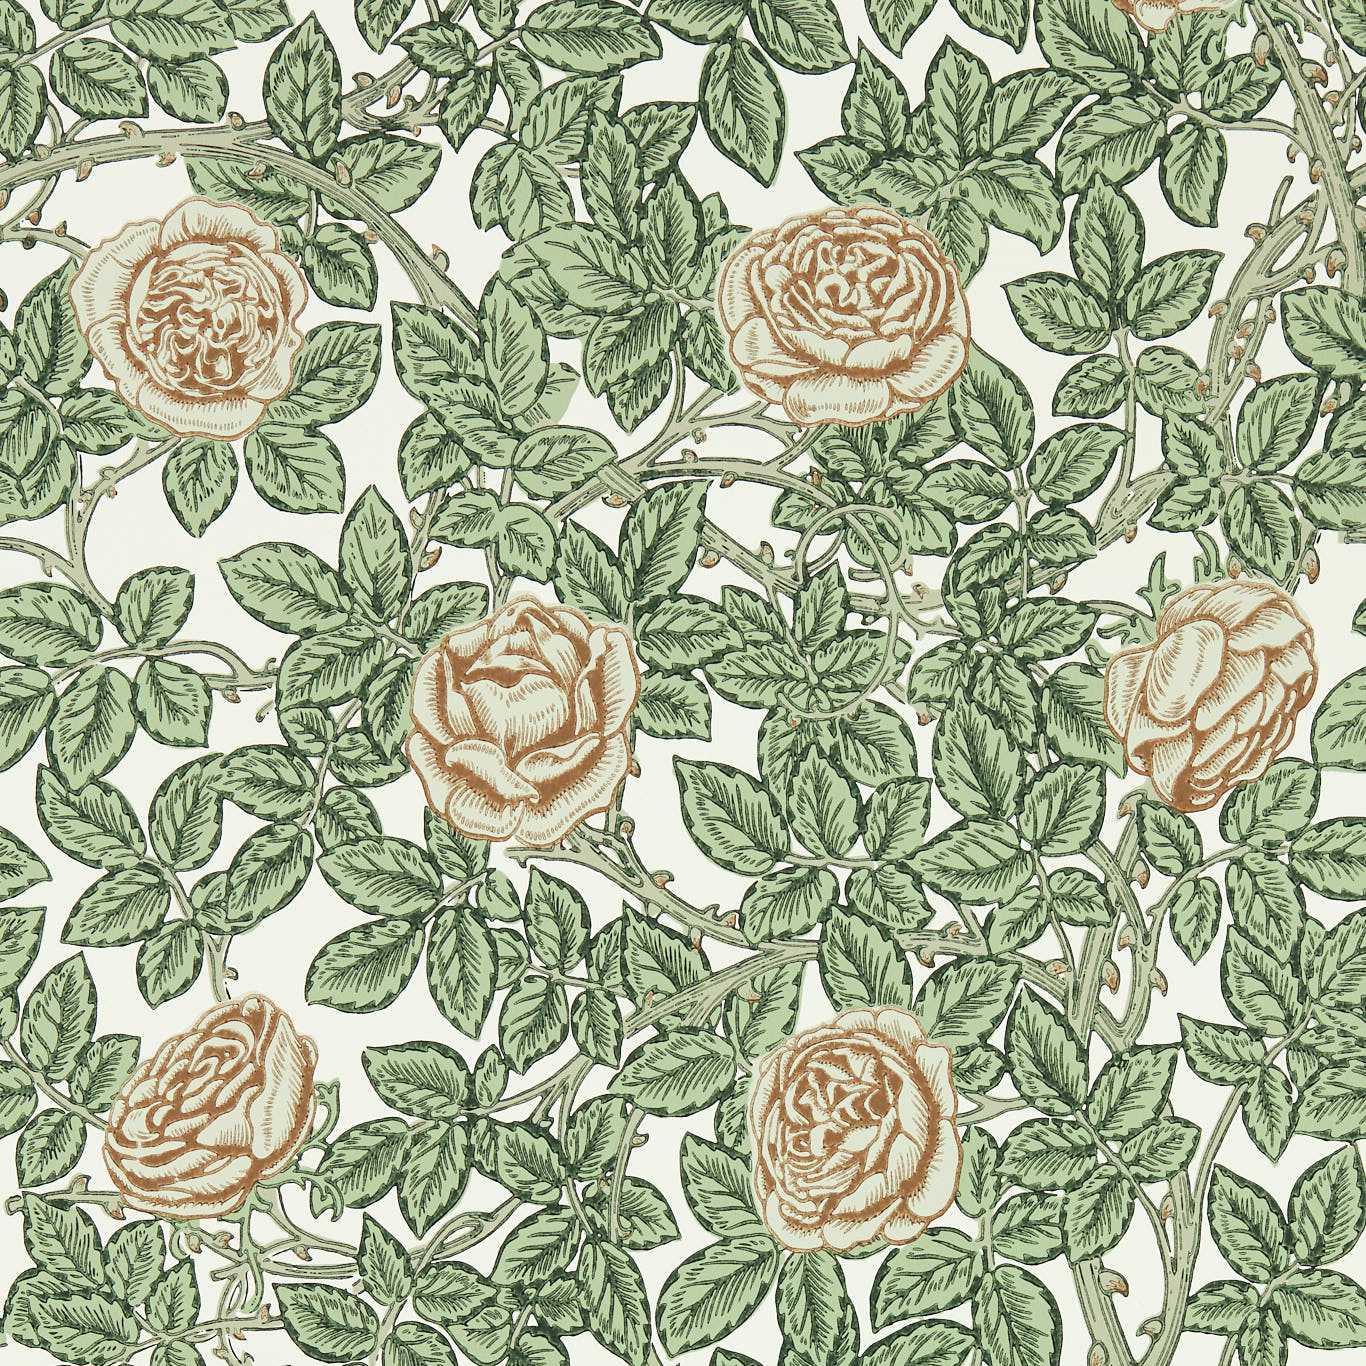 Rambling Rose Leafy Arbour/Pearwood Wallpaper MEWW217208 by Morris & Co